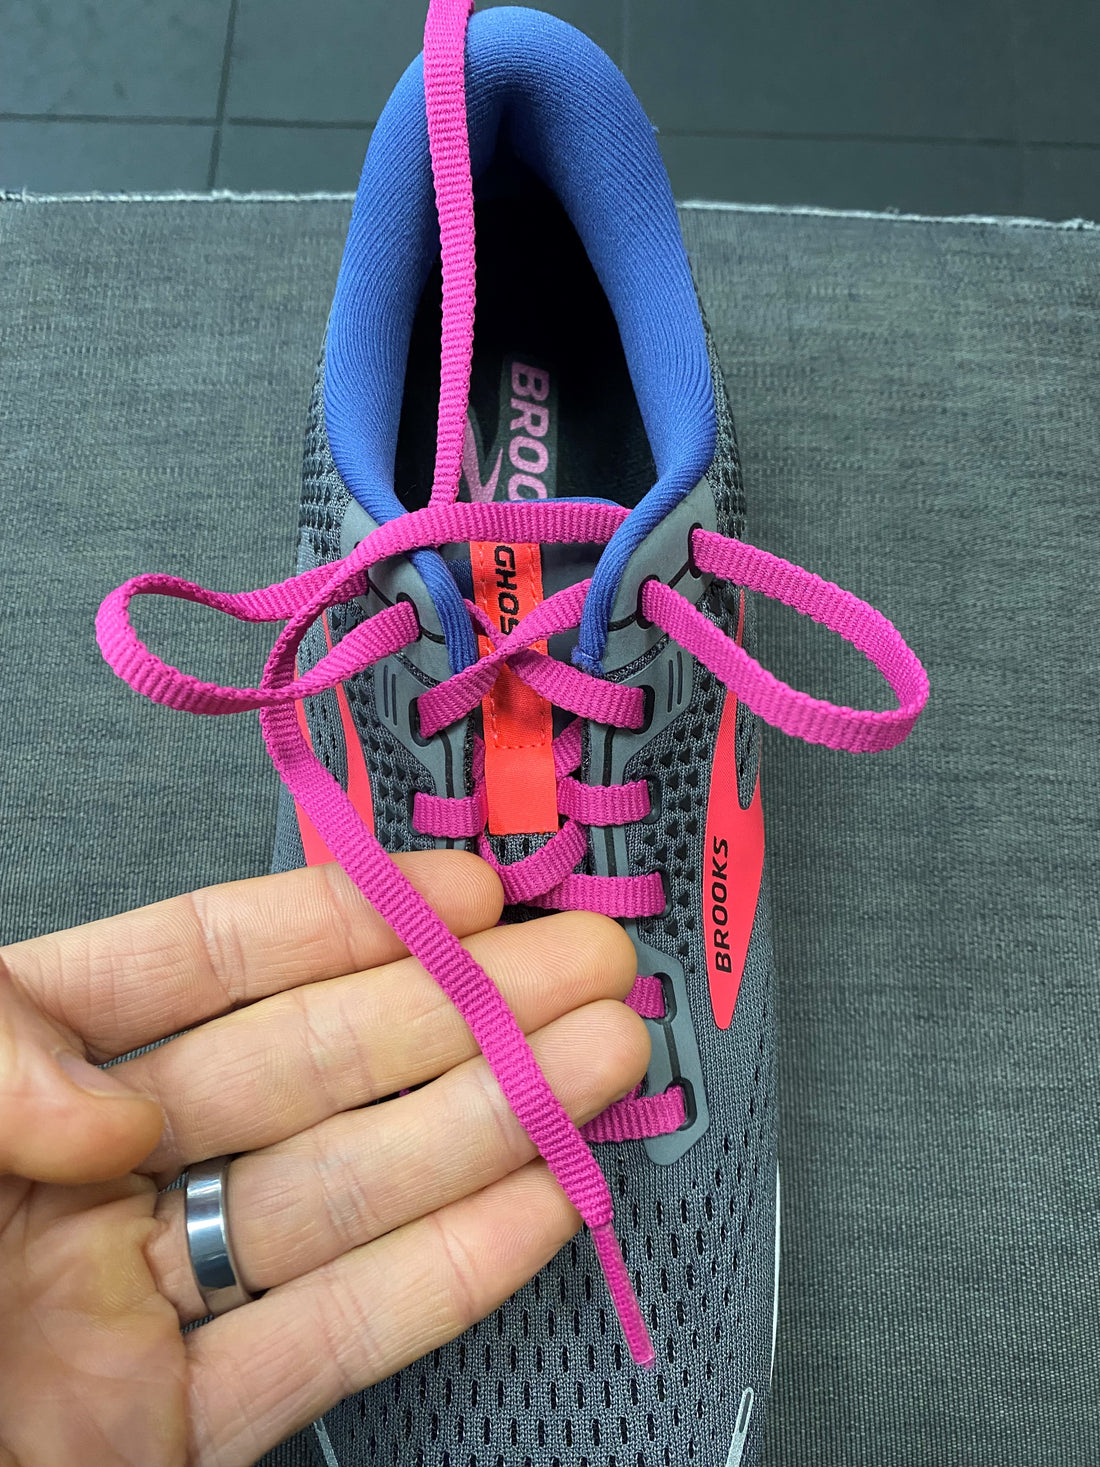 Running Shoe Lacing Techniques for Better Fit